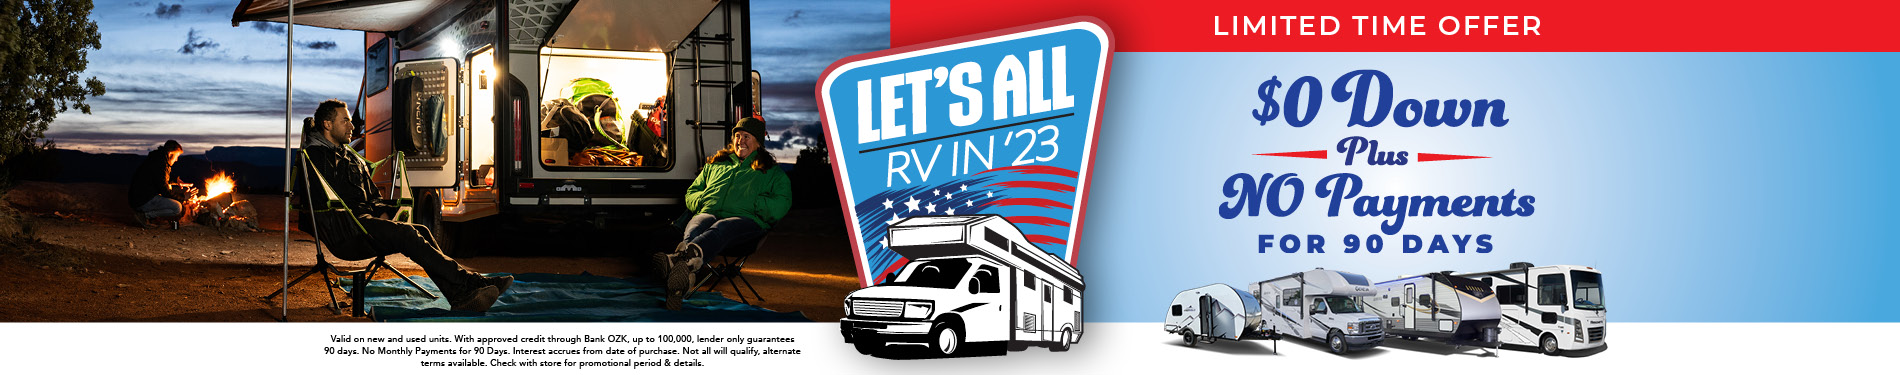 Let's All RV In '23